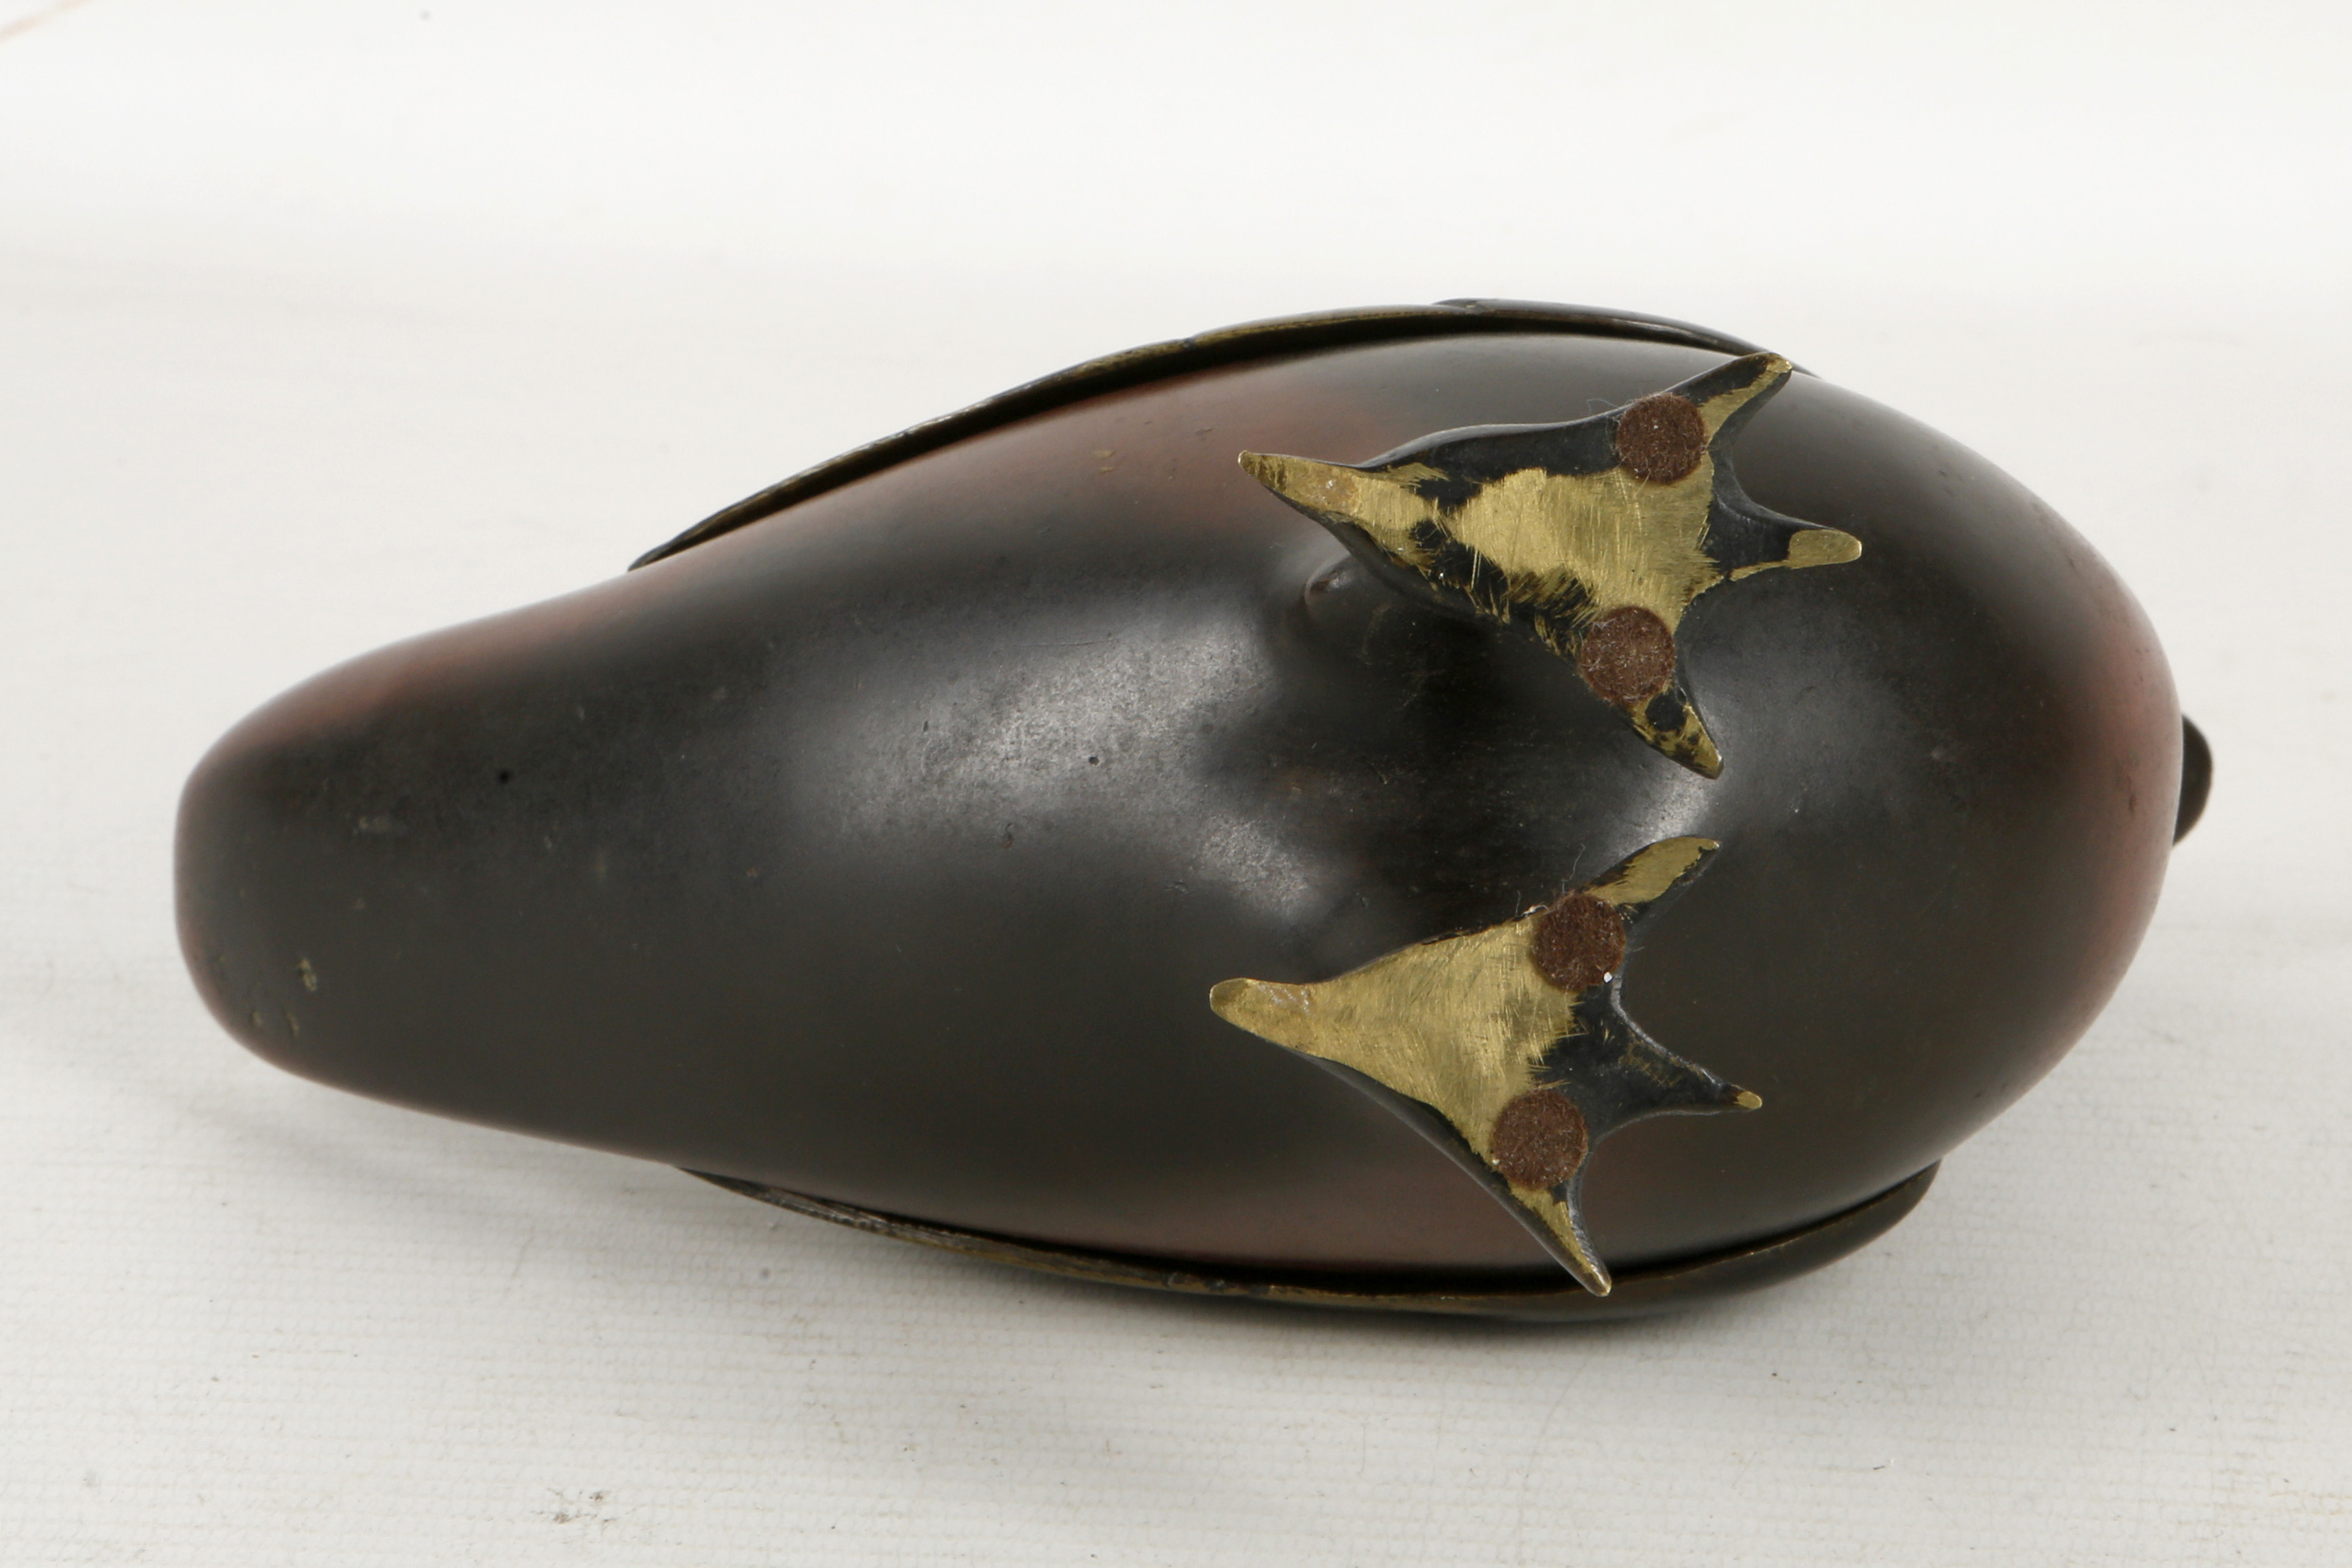 A Chinese or Japanese lacquered bronze duck form c - Image 3 of 3